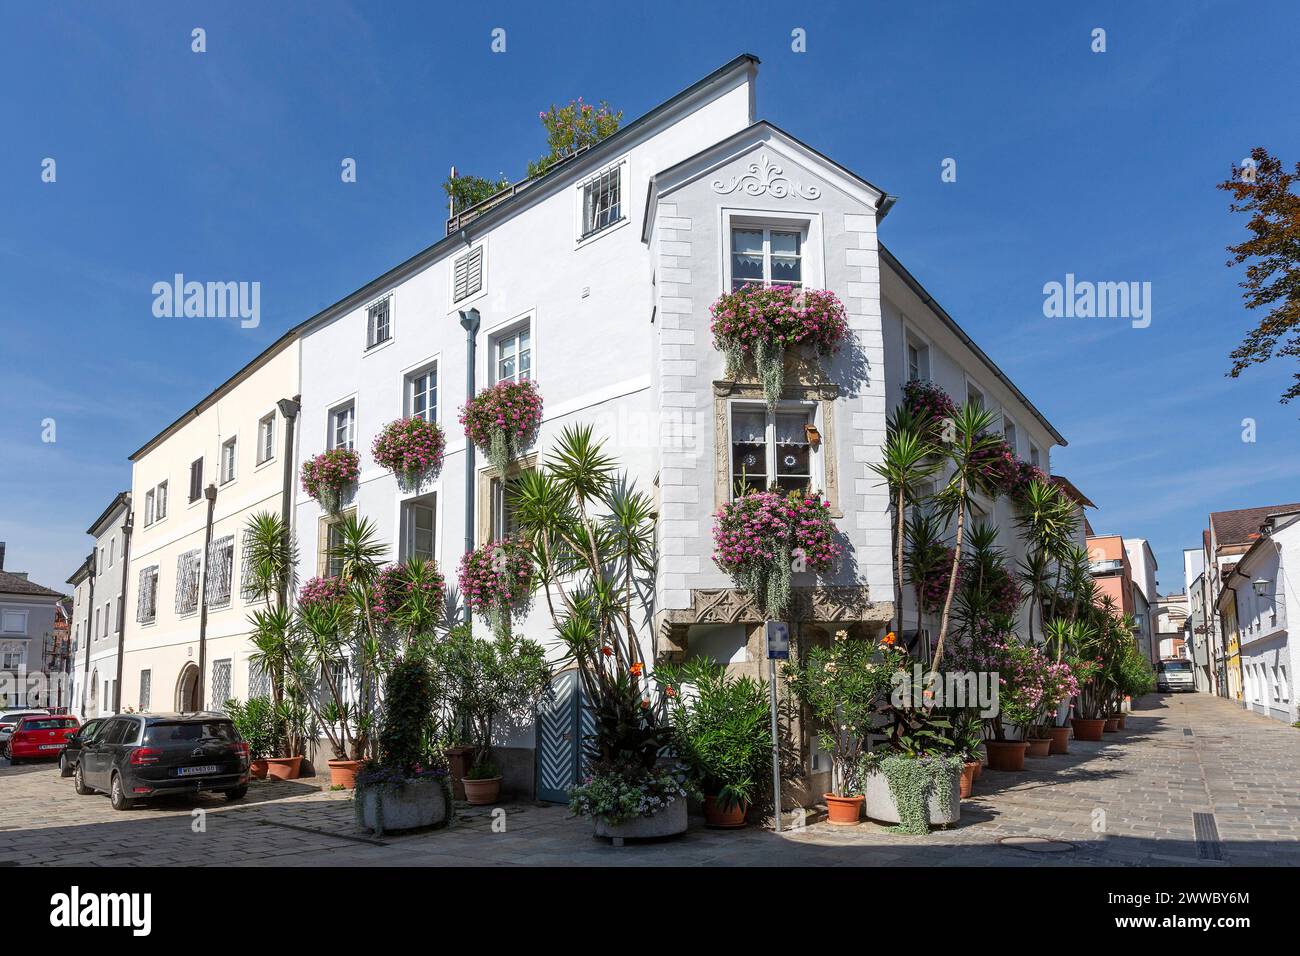 Flowers And Plant Decorations, Residential Building, Wels, Upper Austria, Austria Stock Photo